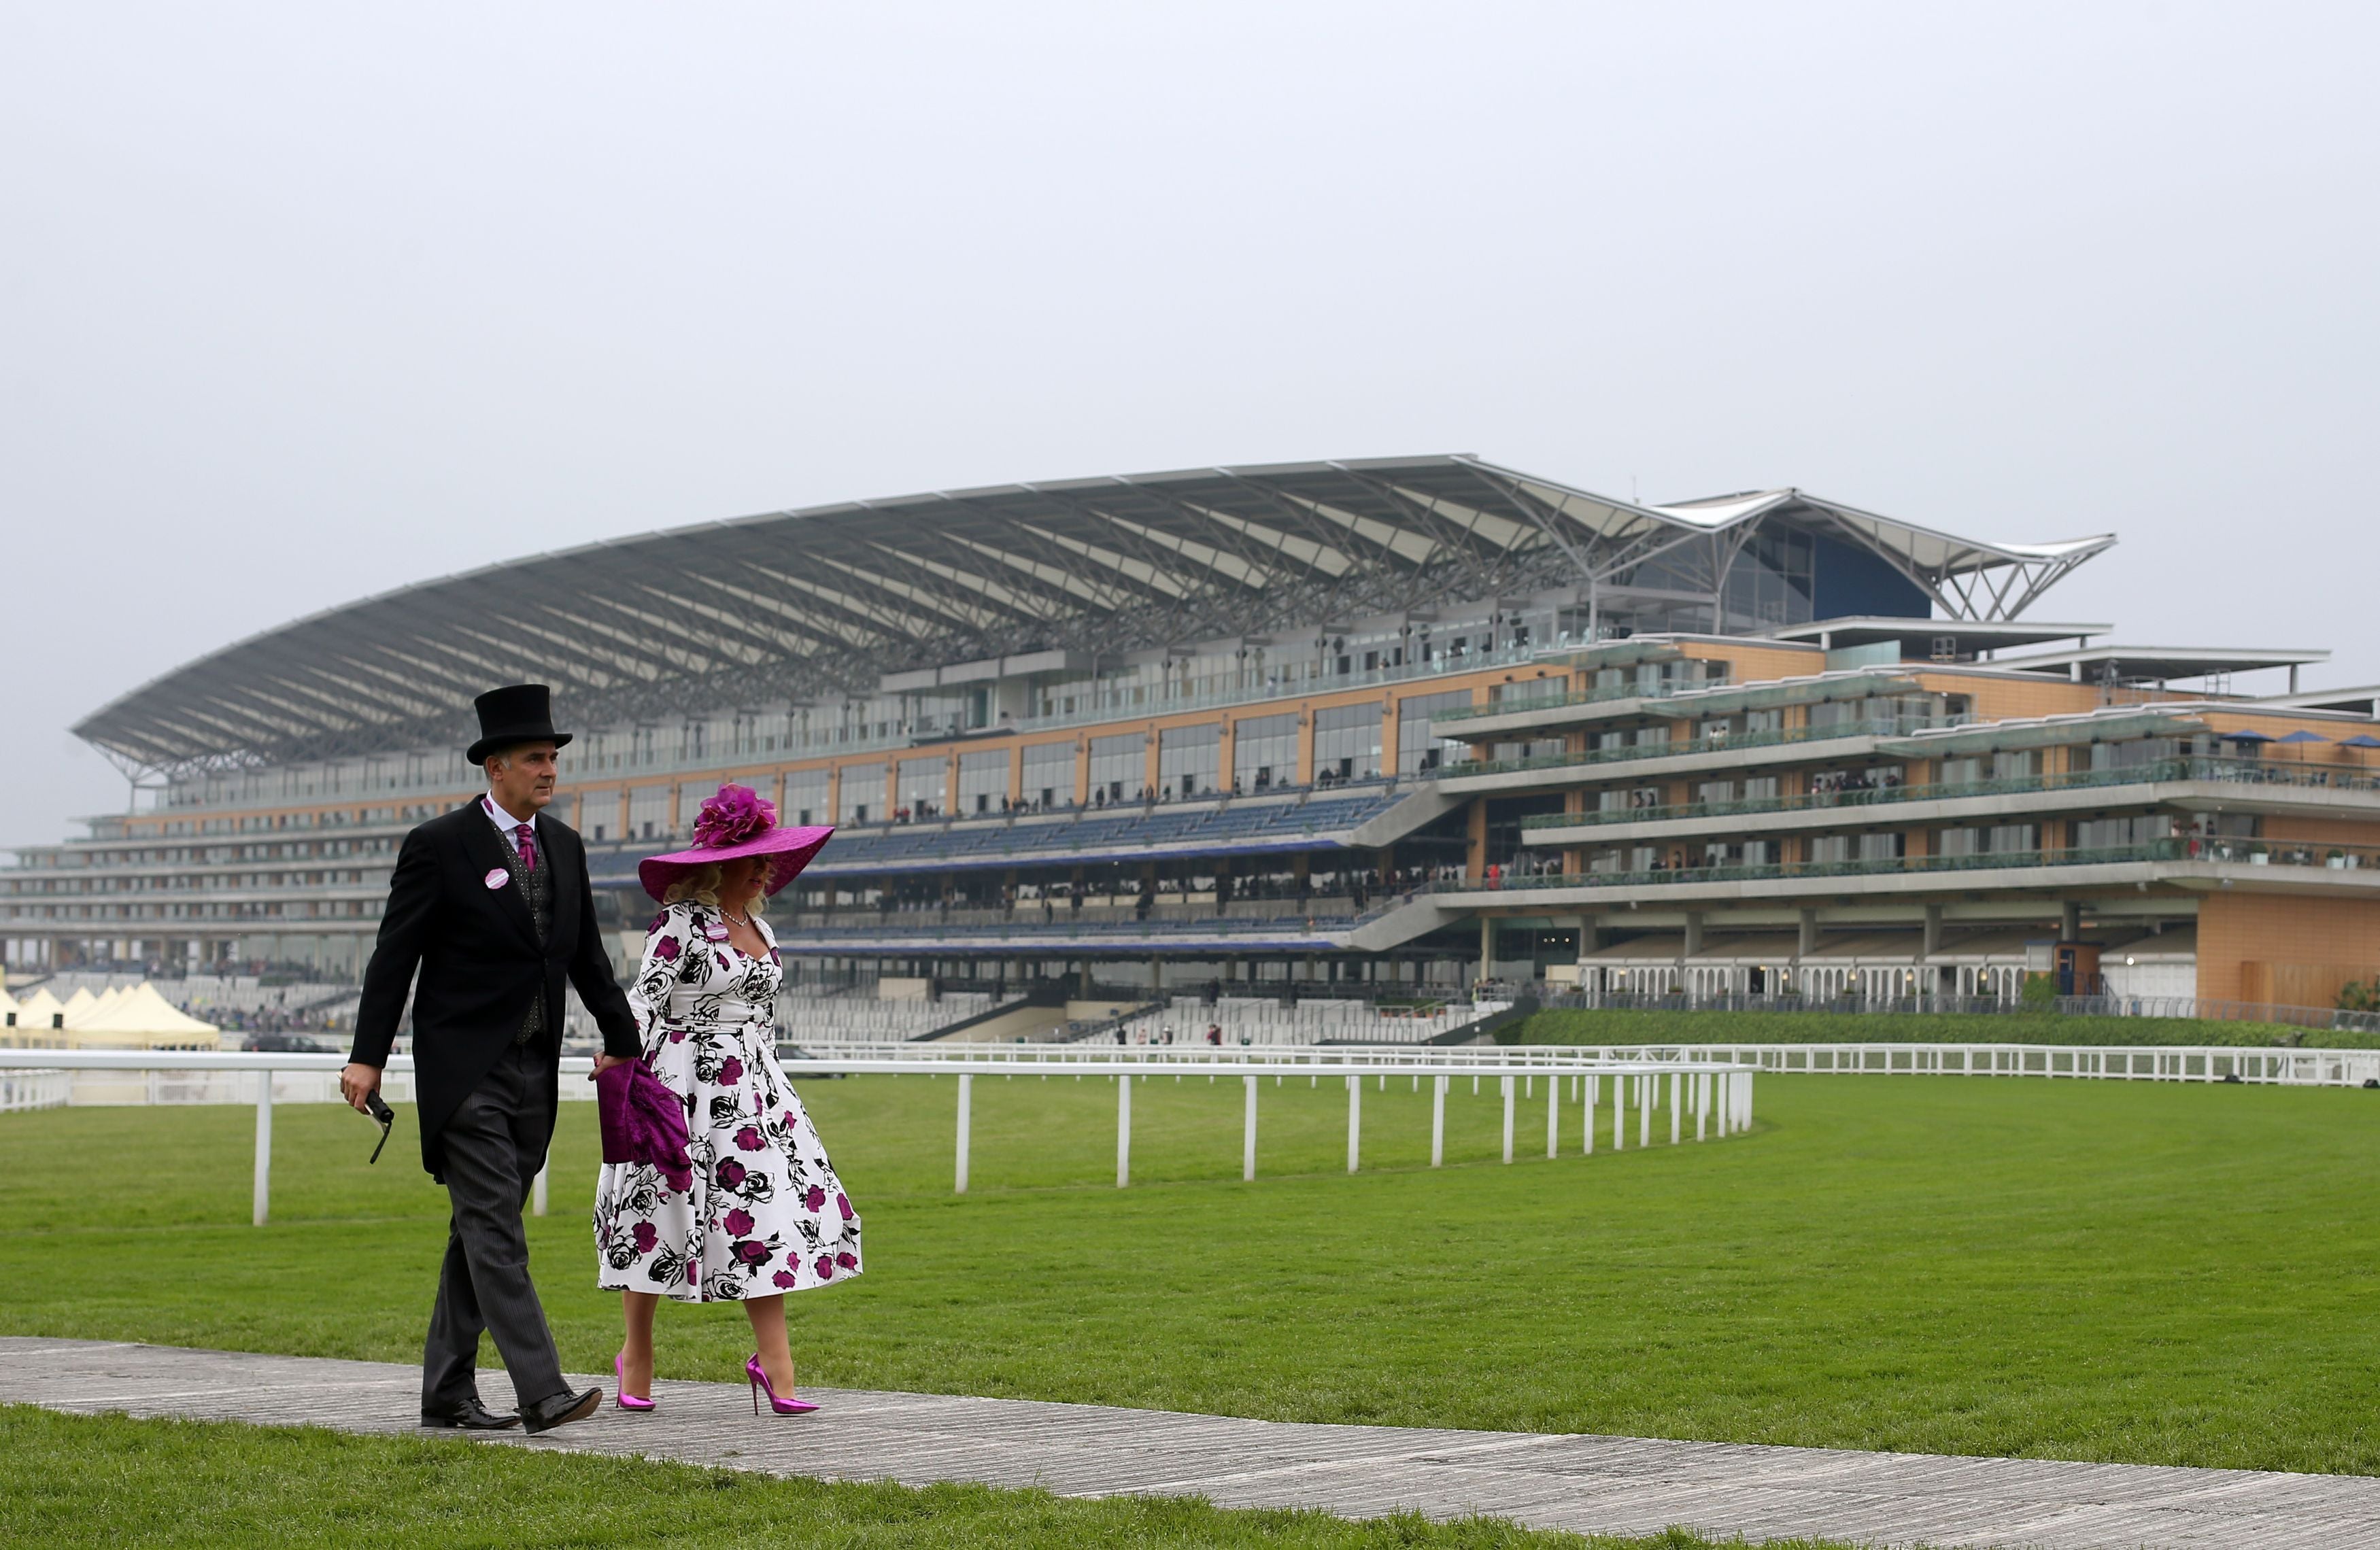 The ground at Royal Ascot could be good to firm by Tuesday afternoon